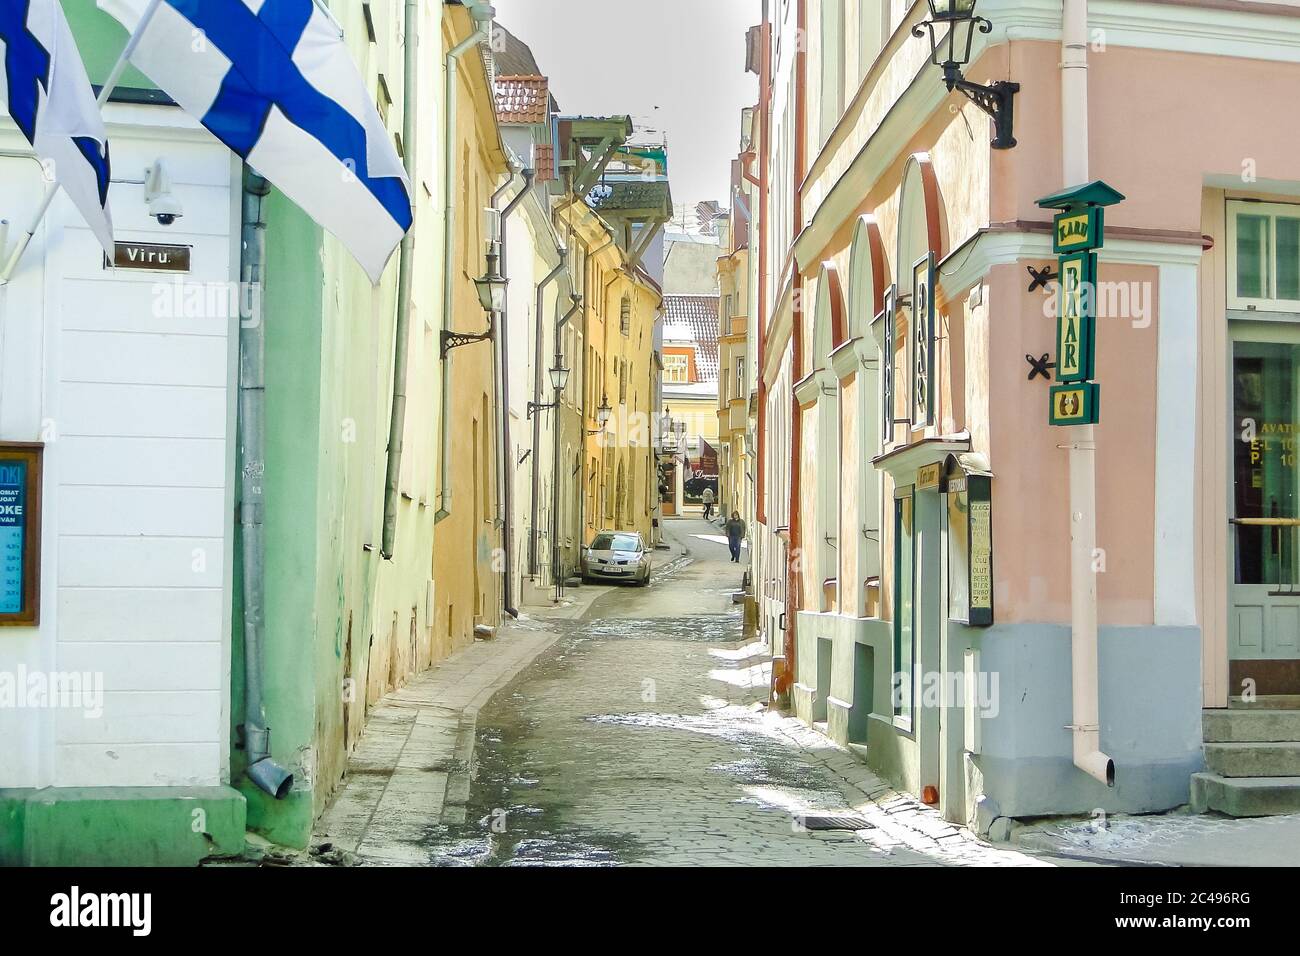 TALLINN, ESTONIA - MAR 03, 2013 - View of Sauna street and Viru street in spring. Historical center of the city. Perspective view. Stock Photo